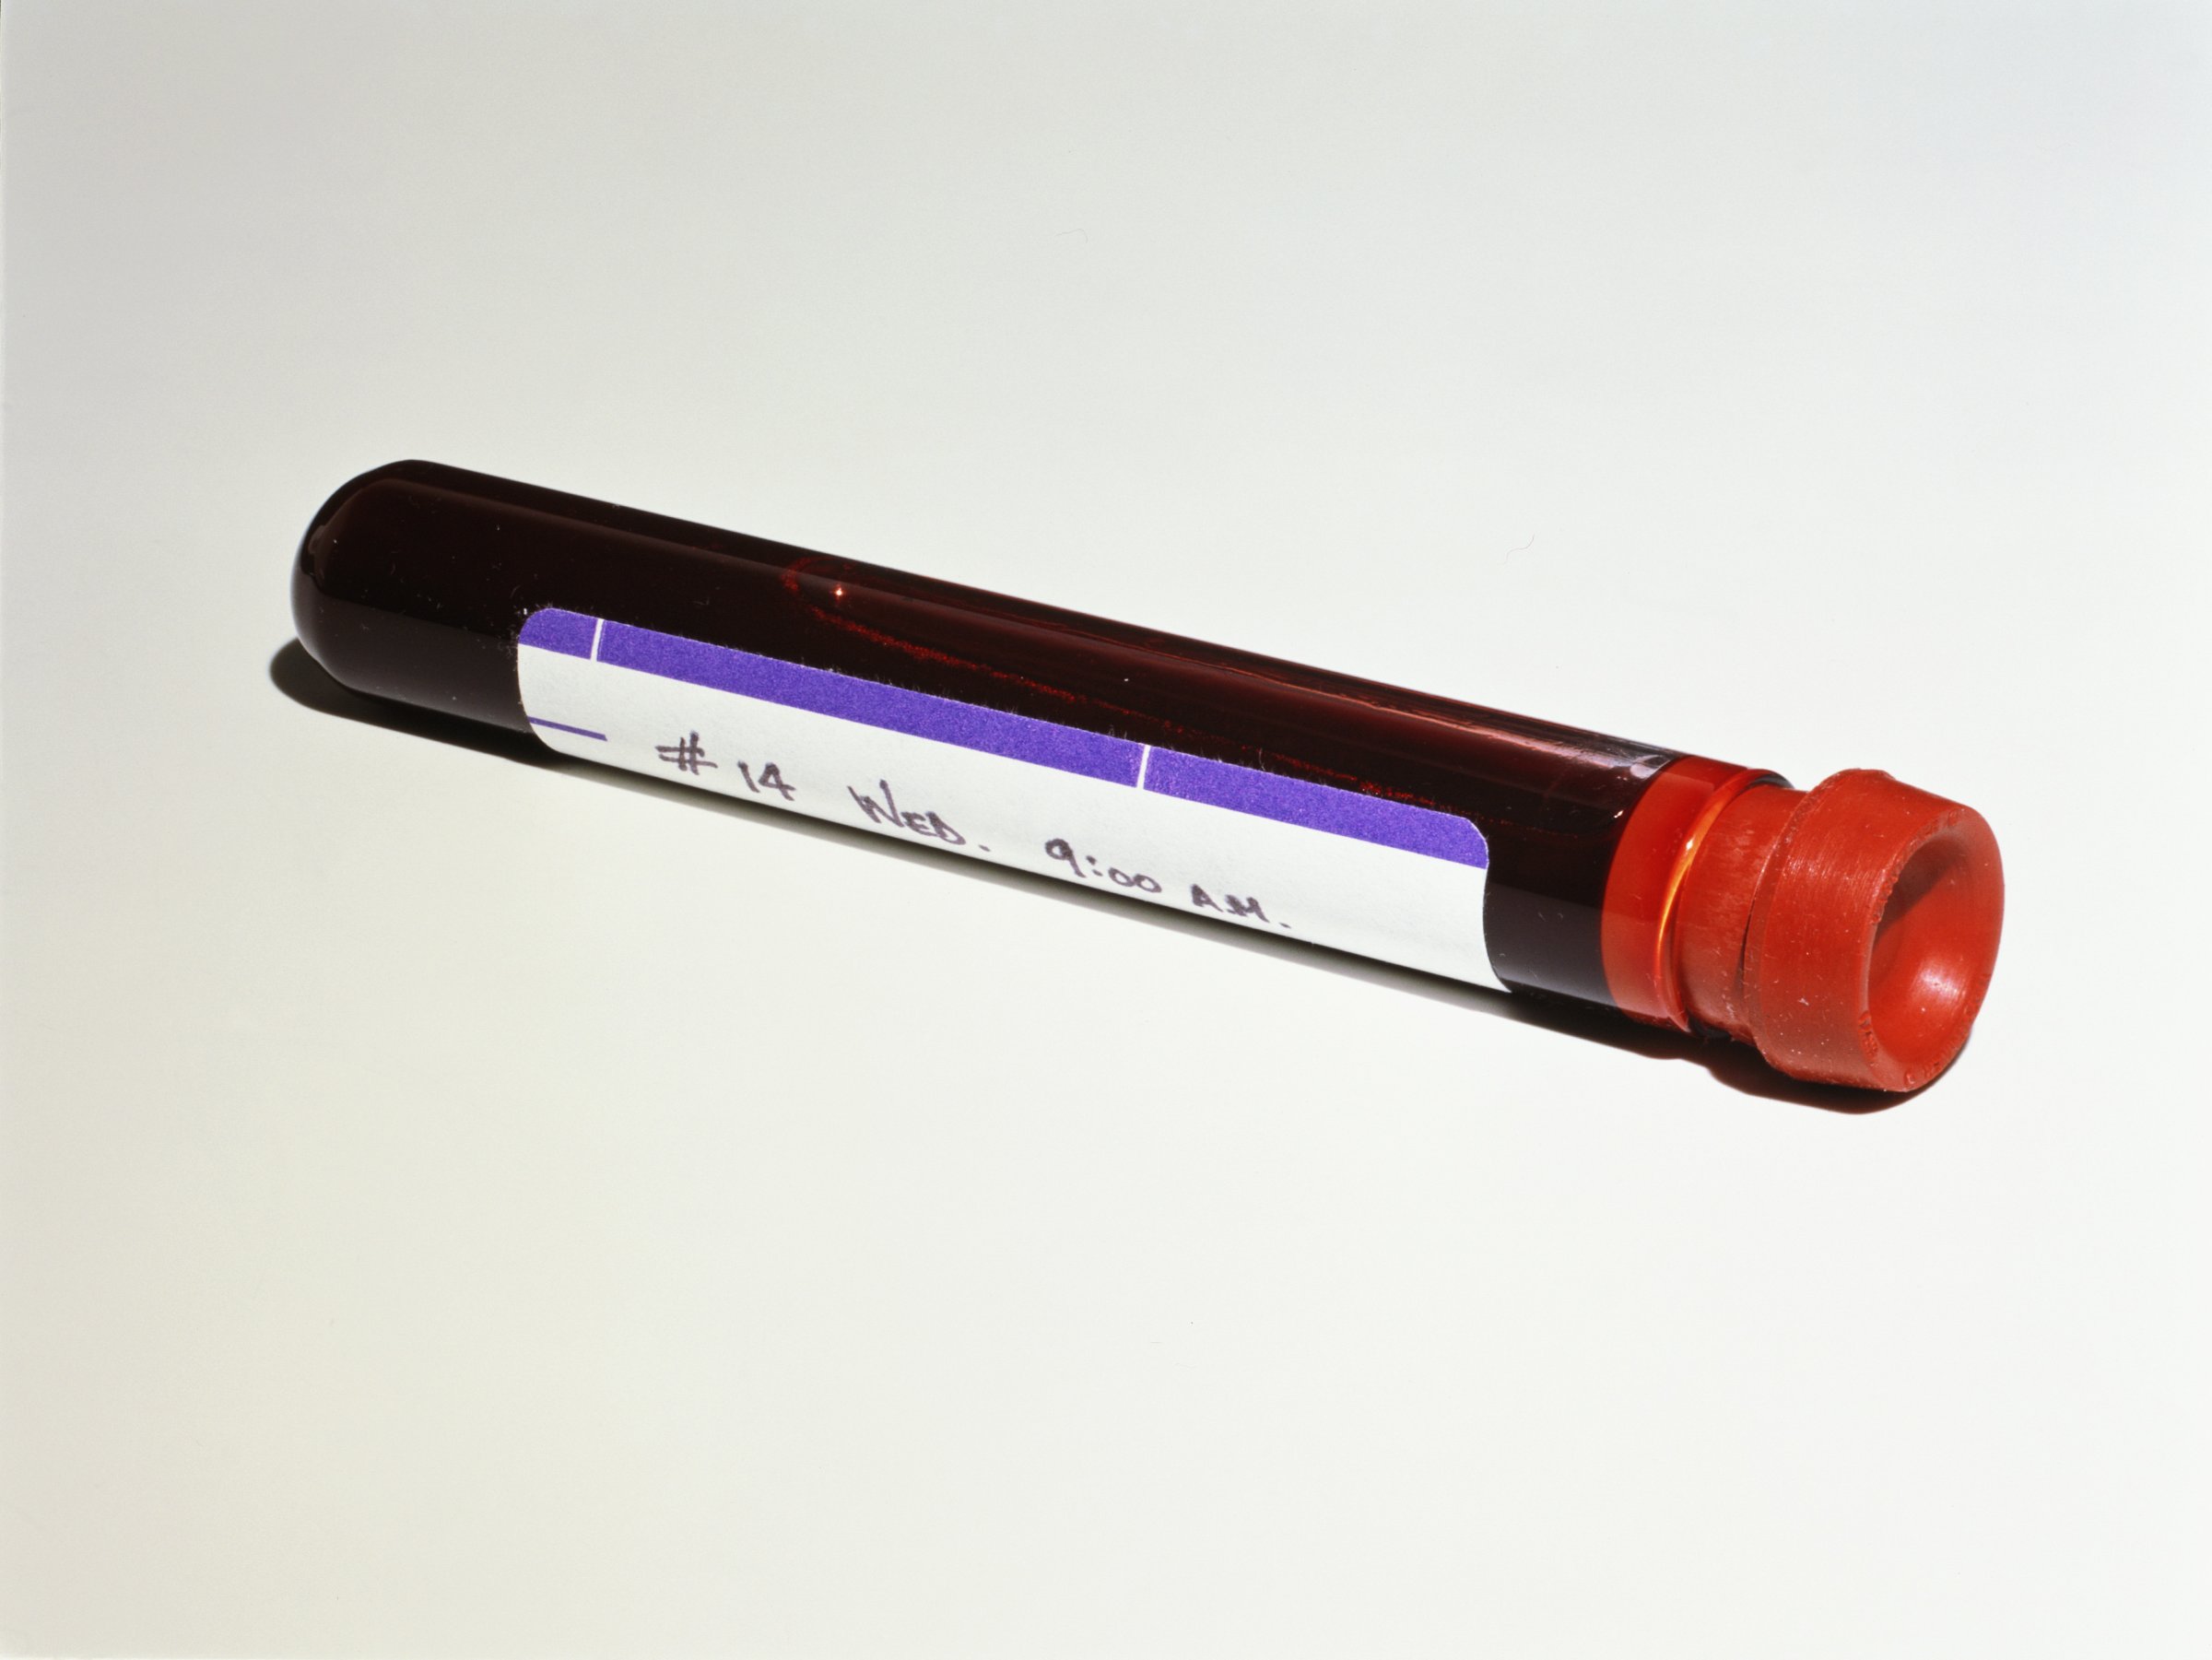 Blood sample in vial, against white background, close-up